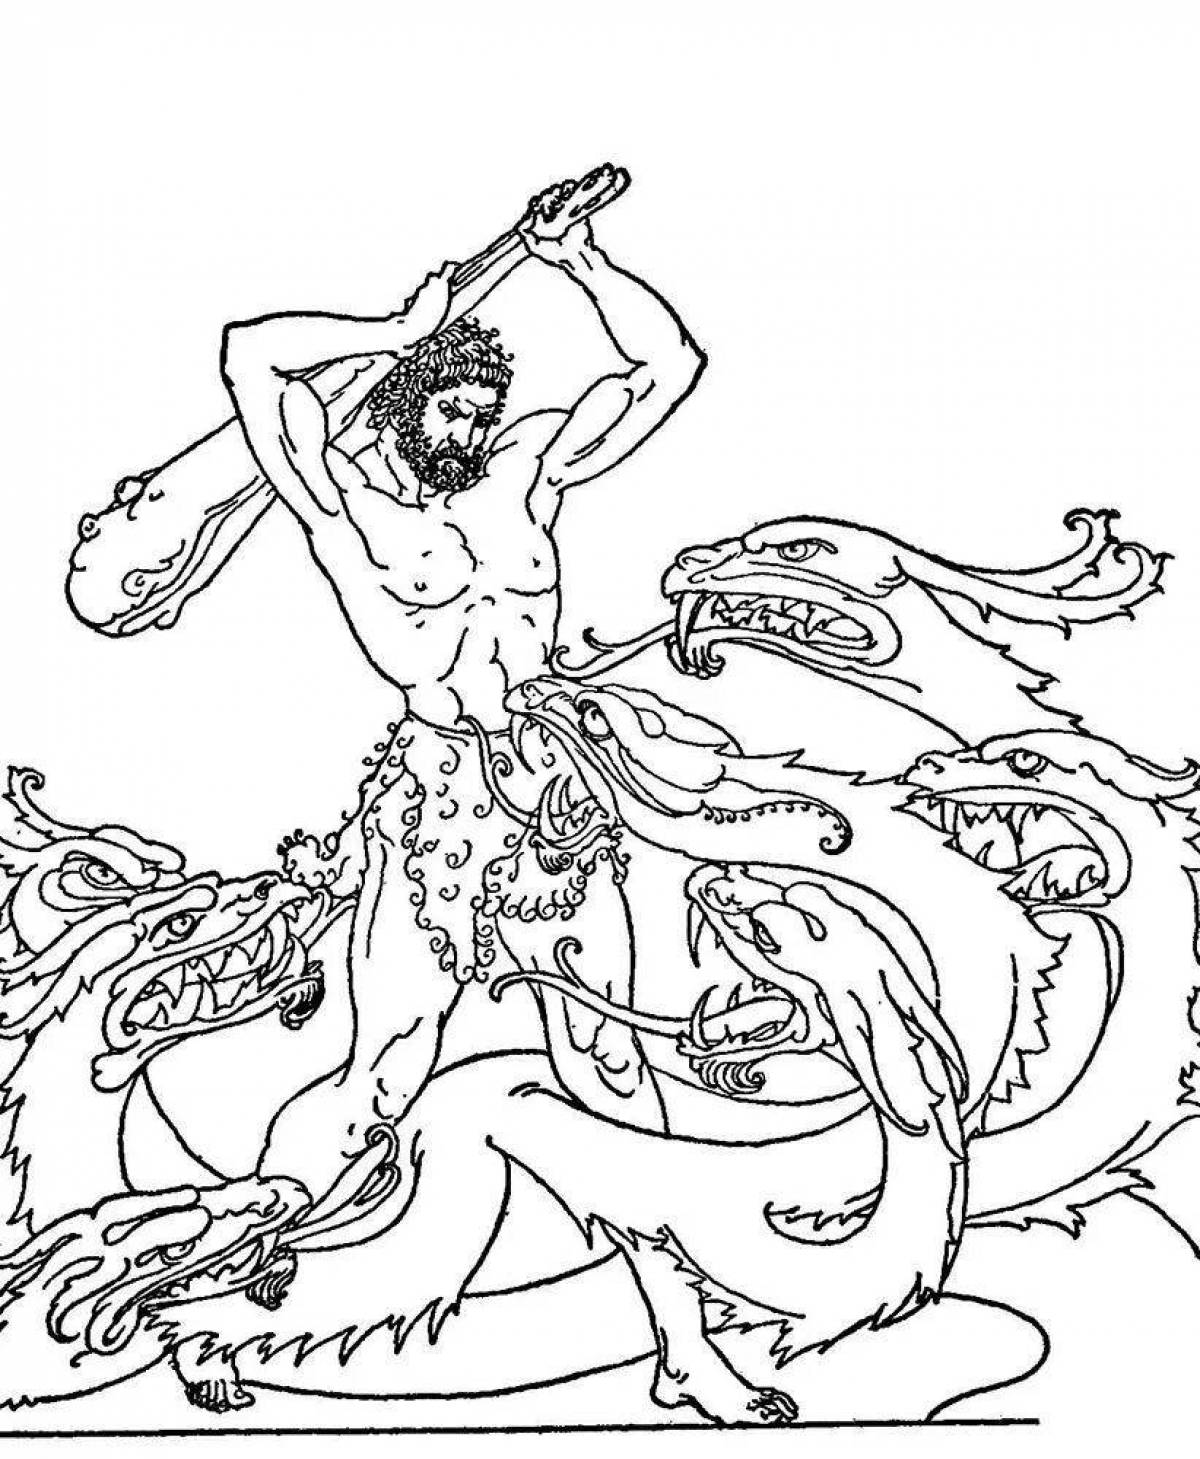 Shining coloring book from ancient Greek myths